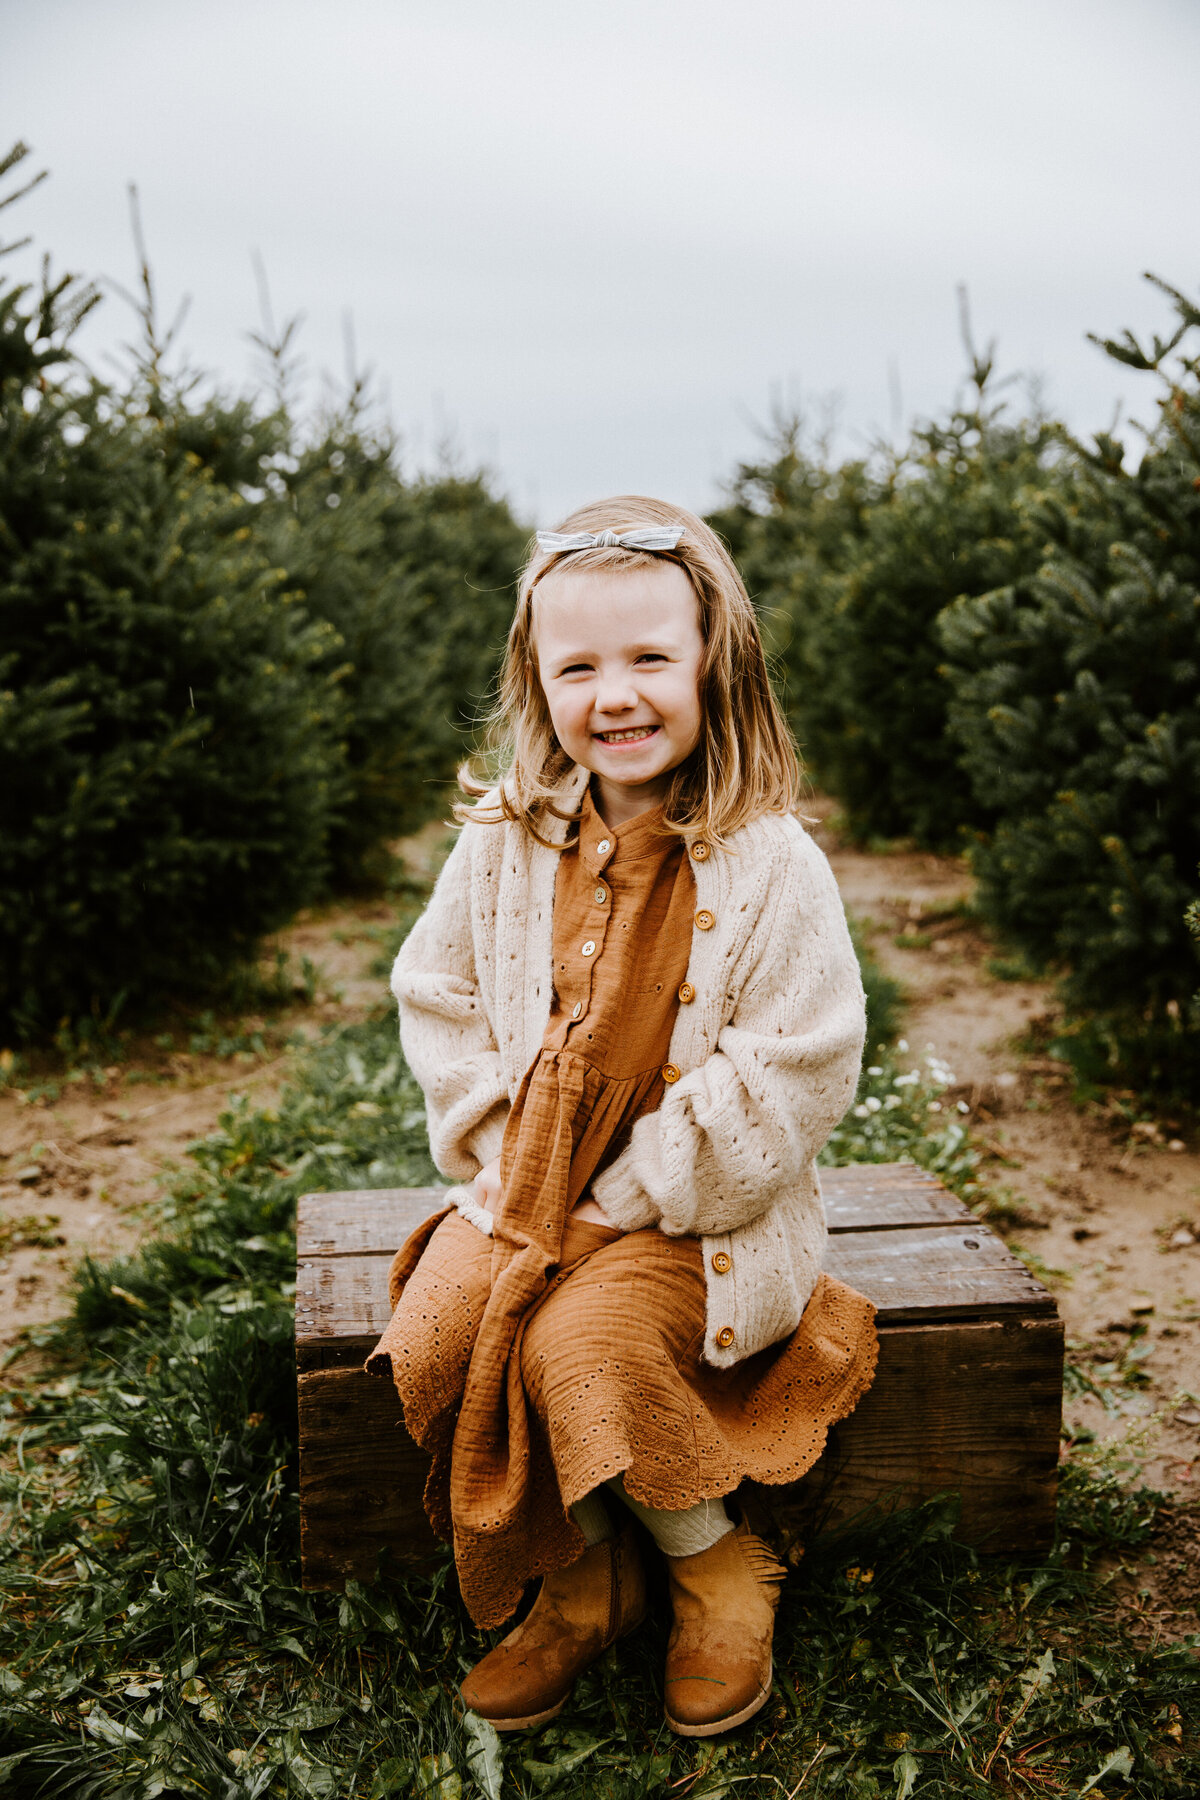 Tree Farm Christmas photos at Tree Lane Farms in London, Ontario. A young girl in a deep mustard dress and cream sweater is sitting on a crate amongst the Christmas evergreen trees with her hands in her pockets and smiling at the camera.